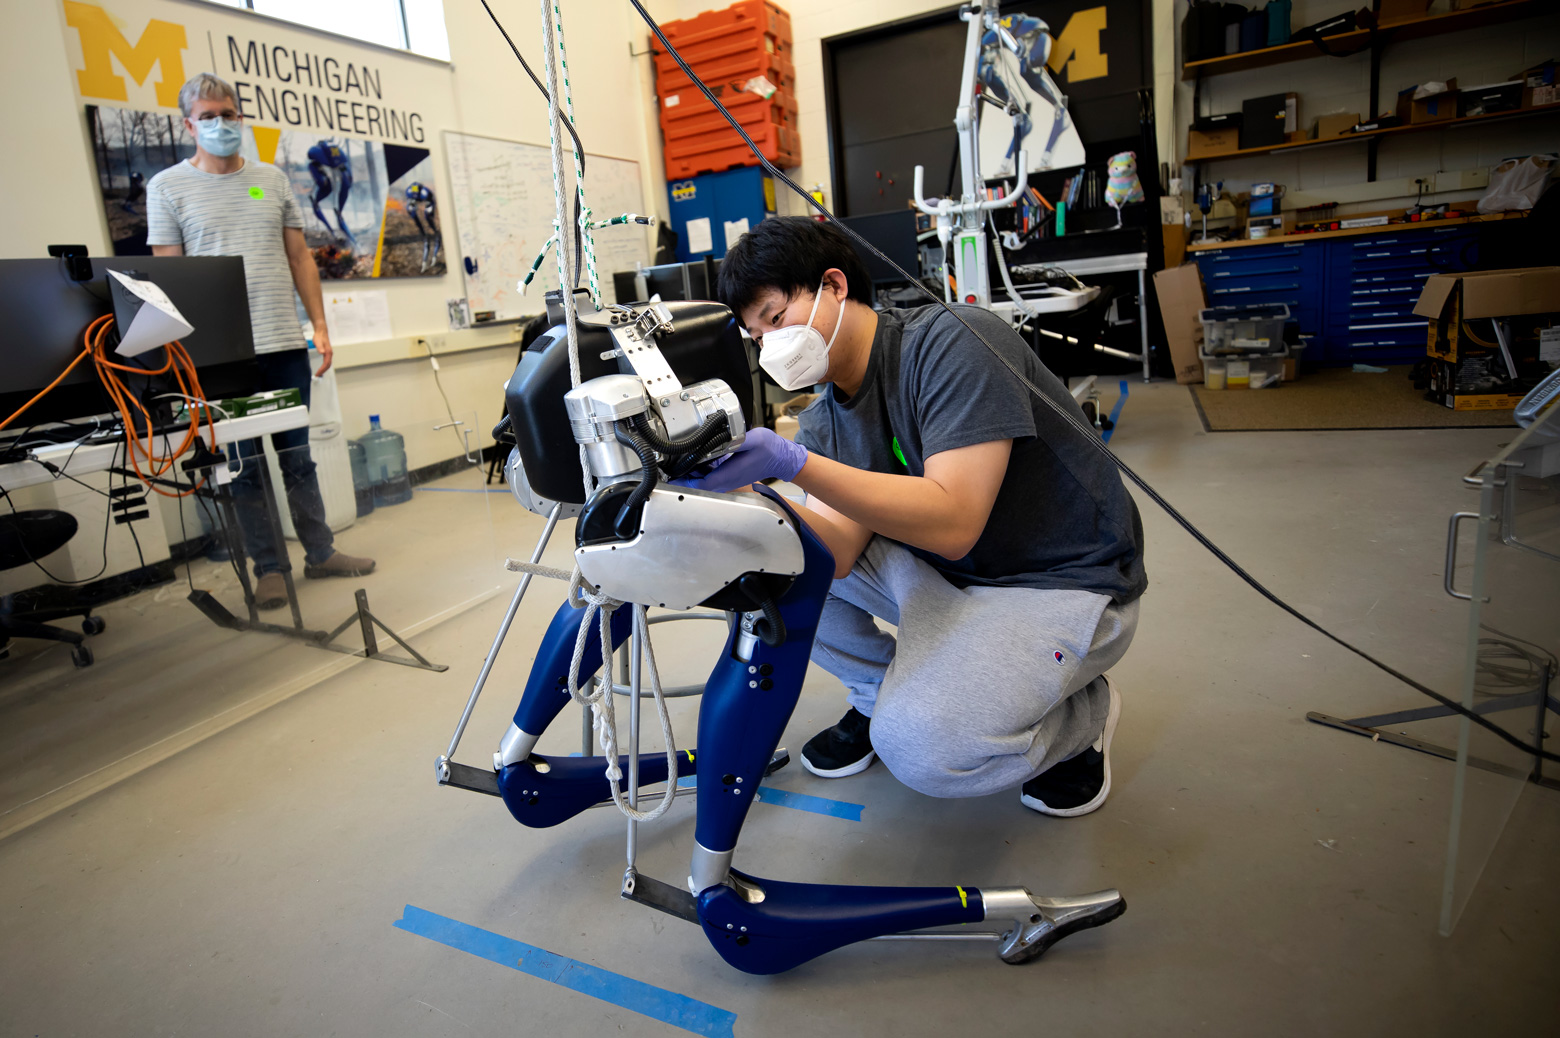 Yukai Gong, Robotics PhD Student, installs a battery into Cassie, a bipedal robot, as Jessy Grizzle, Director of the Robotics Institute, looks on in their lab on North Campus of the University of Michigan in Ann Arbor, MI on May 26, 2020.